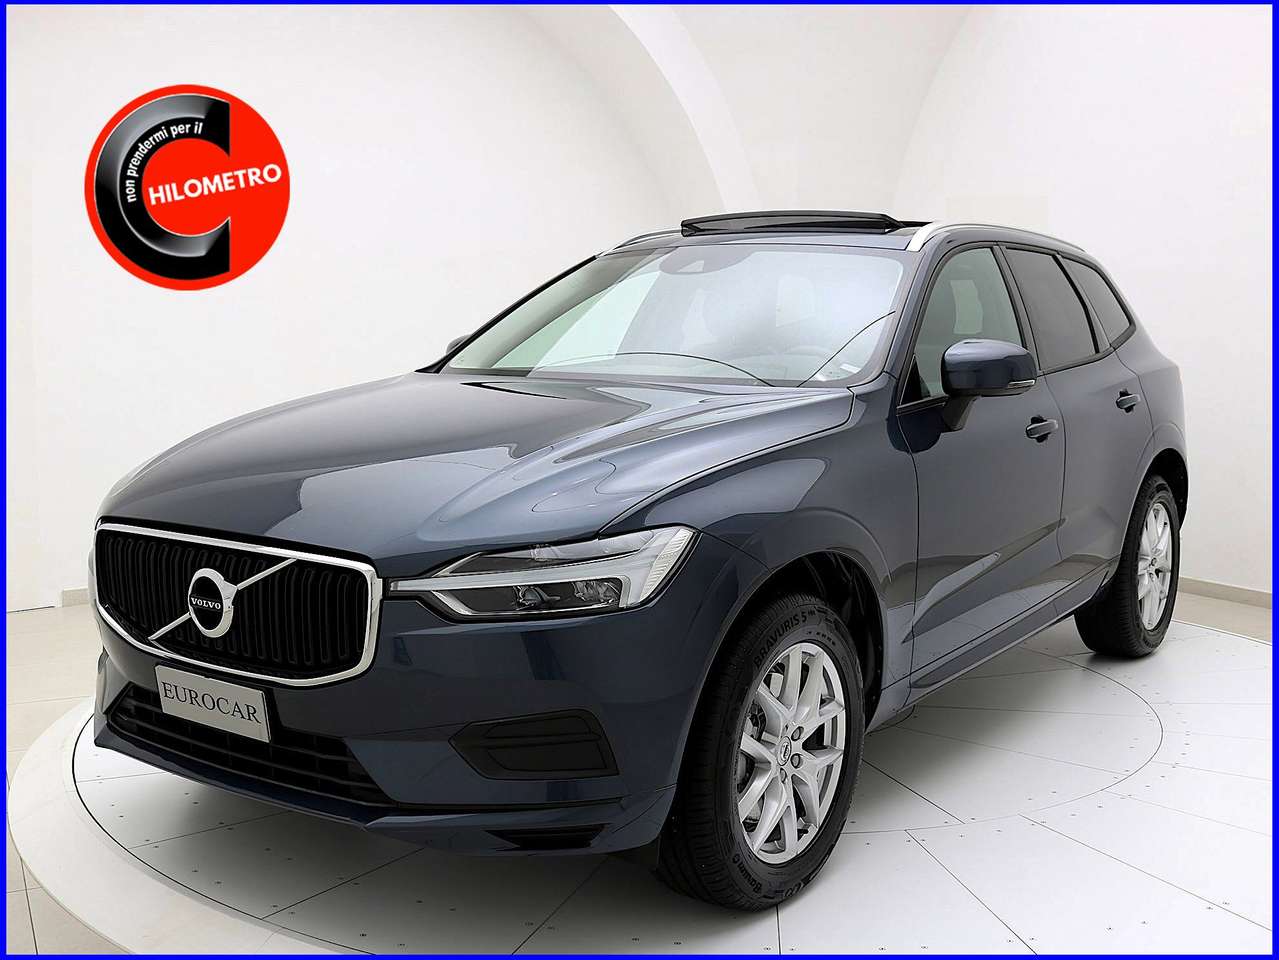 Volvo XC60 2.0 D5 AWD Geartronic✔️TETTO APRIBILE✔️LED